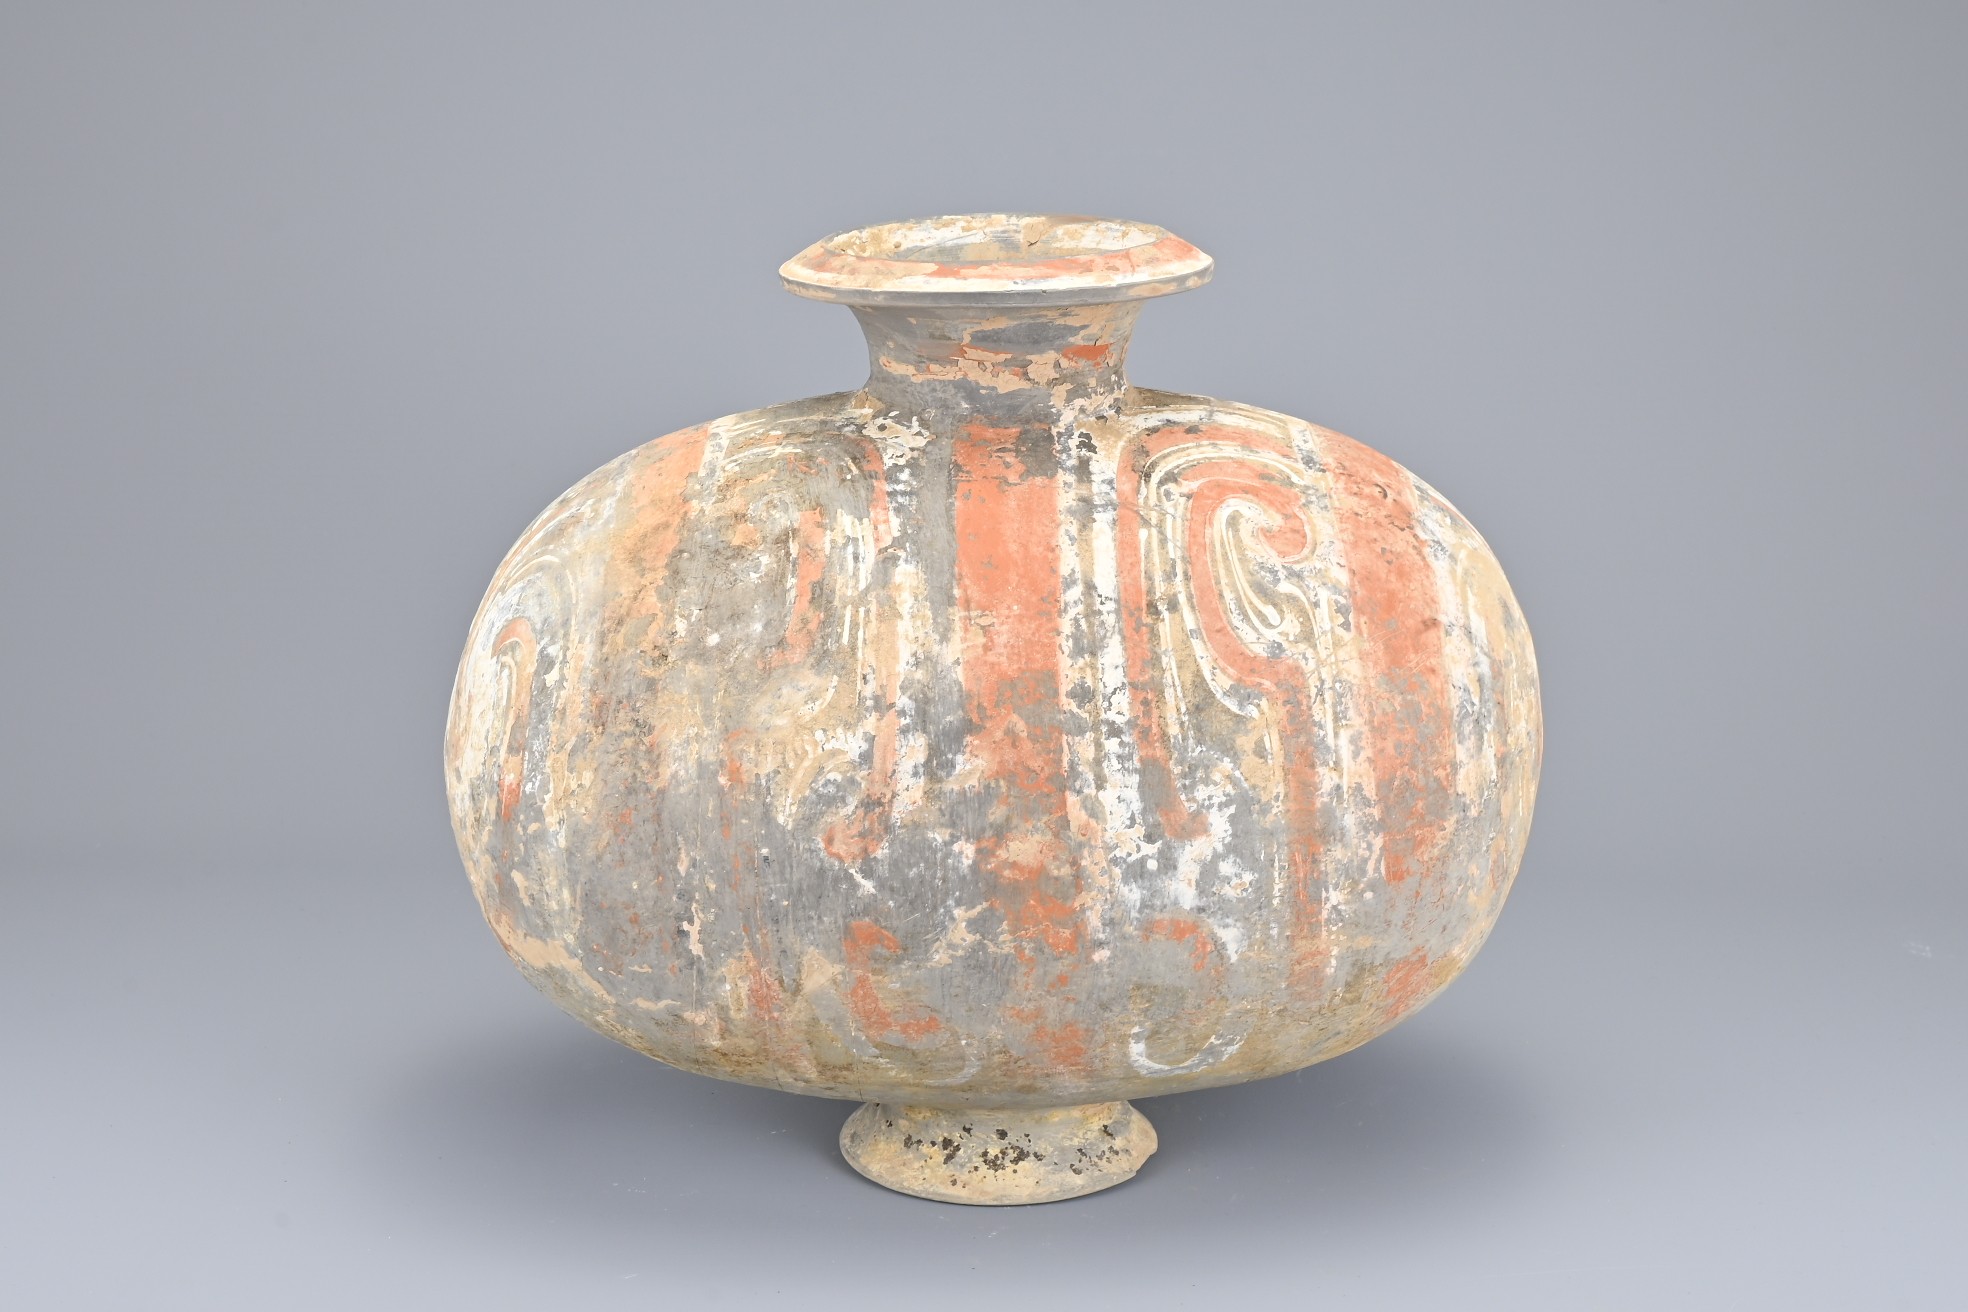 A CHINESE PAINTED POTTERY COCOON JAR, HAN DYNASTY. Referred to as a 'cocoon jar' due to the